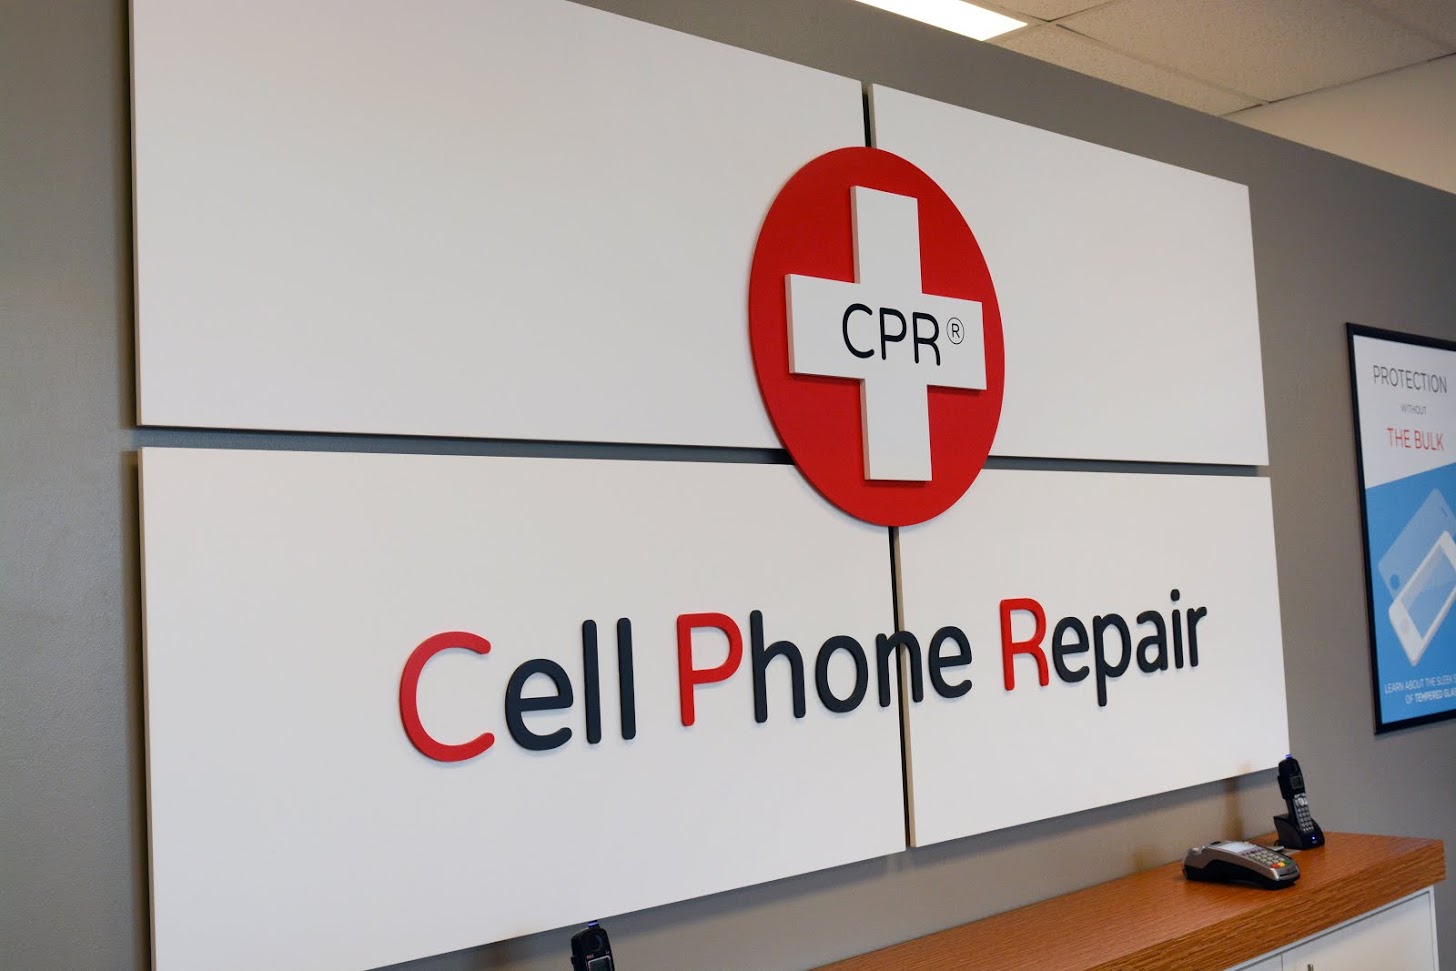 CPR Cell Phone Repair, Thursday, April 25, 2019, Press release picture